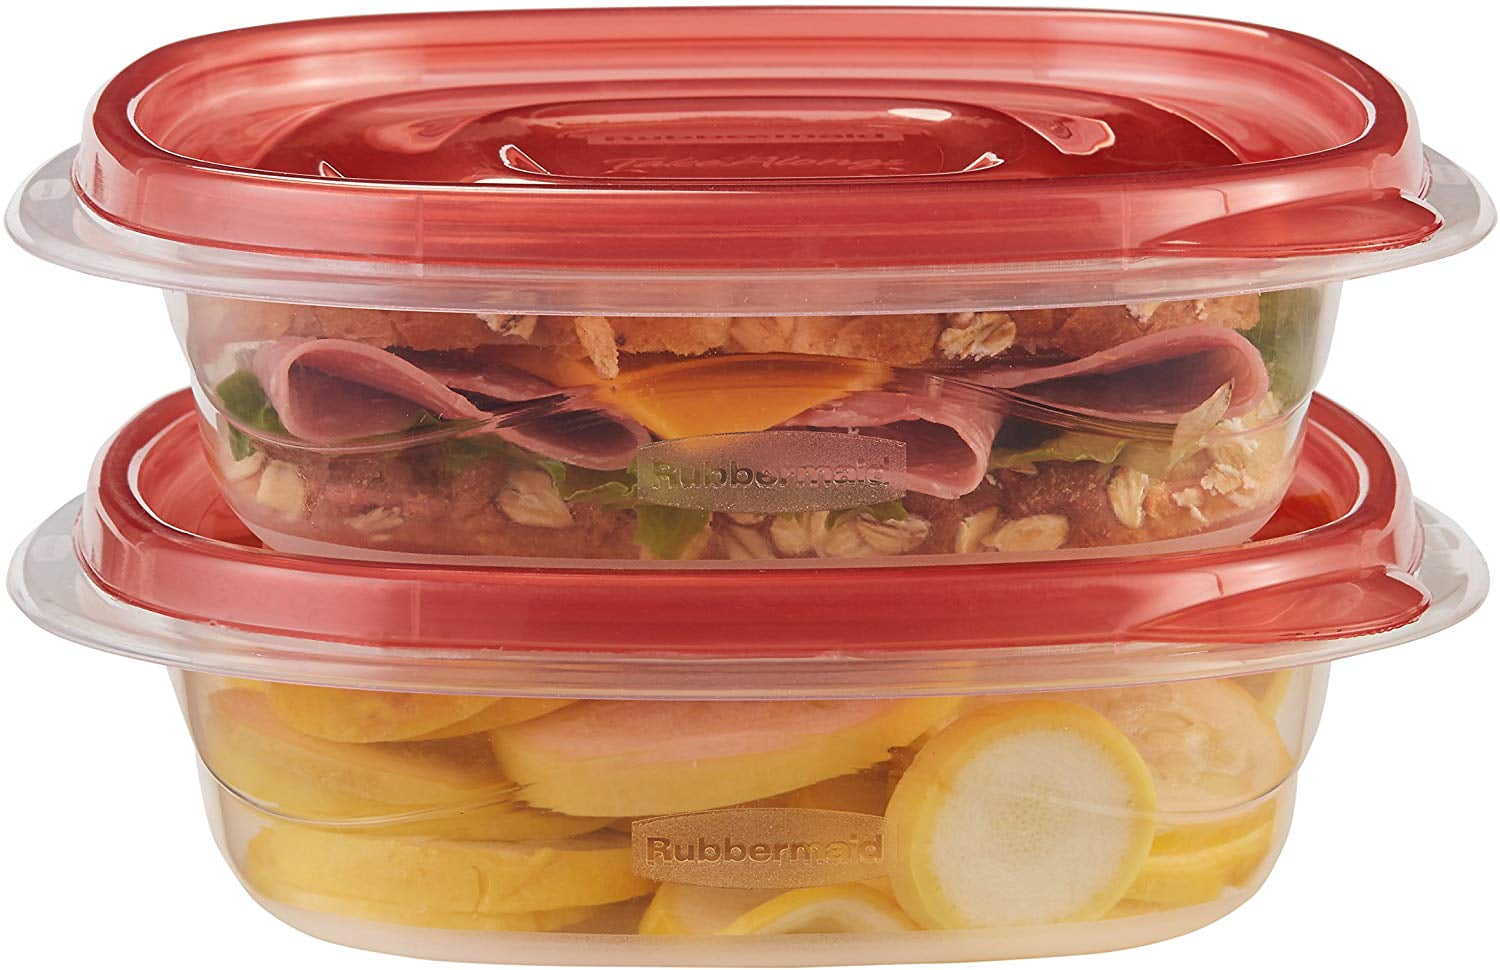 Rubbermaid TakeAlongs 40-Piece Food Storage Container Set in Red 1922500 -  The Home Depot